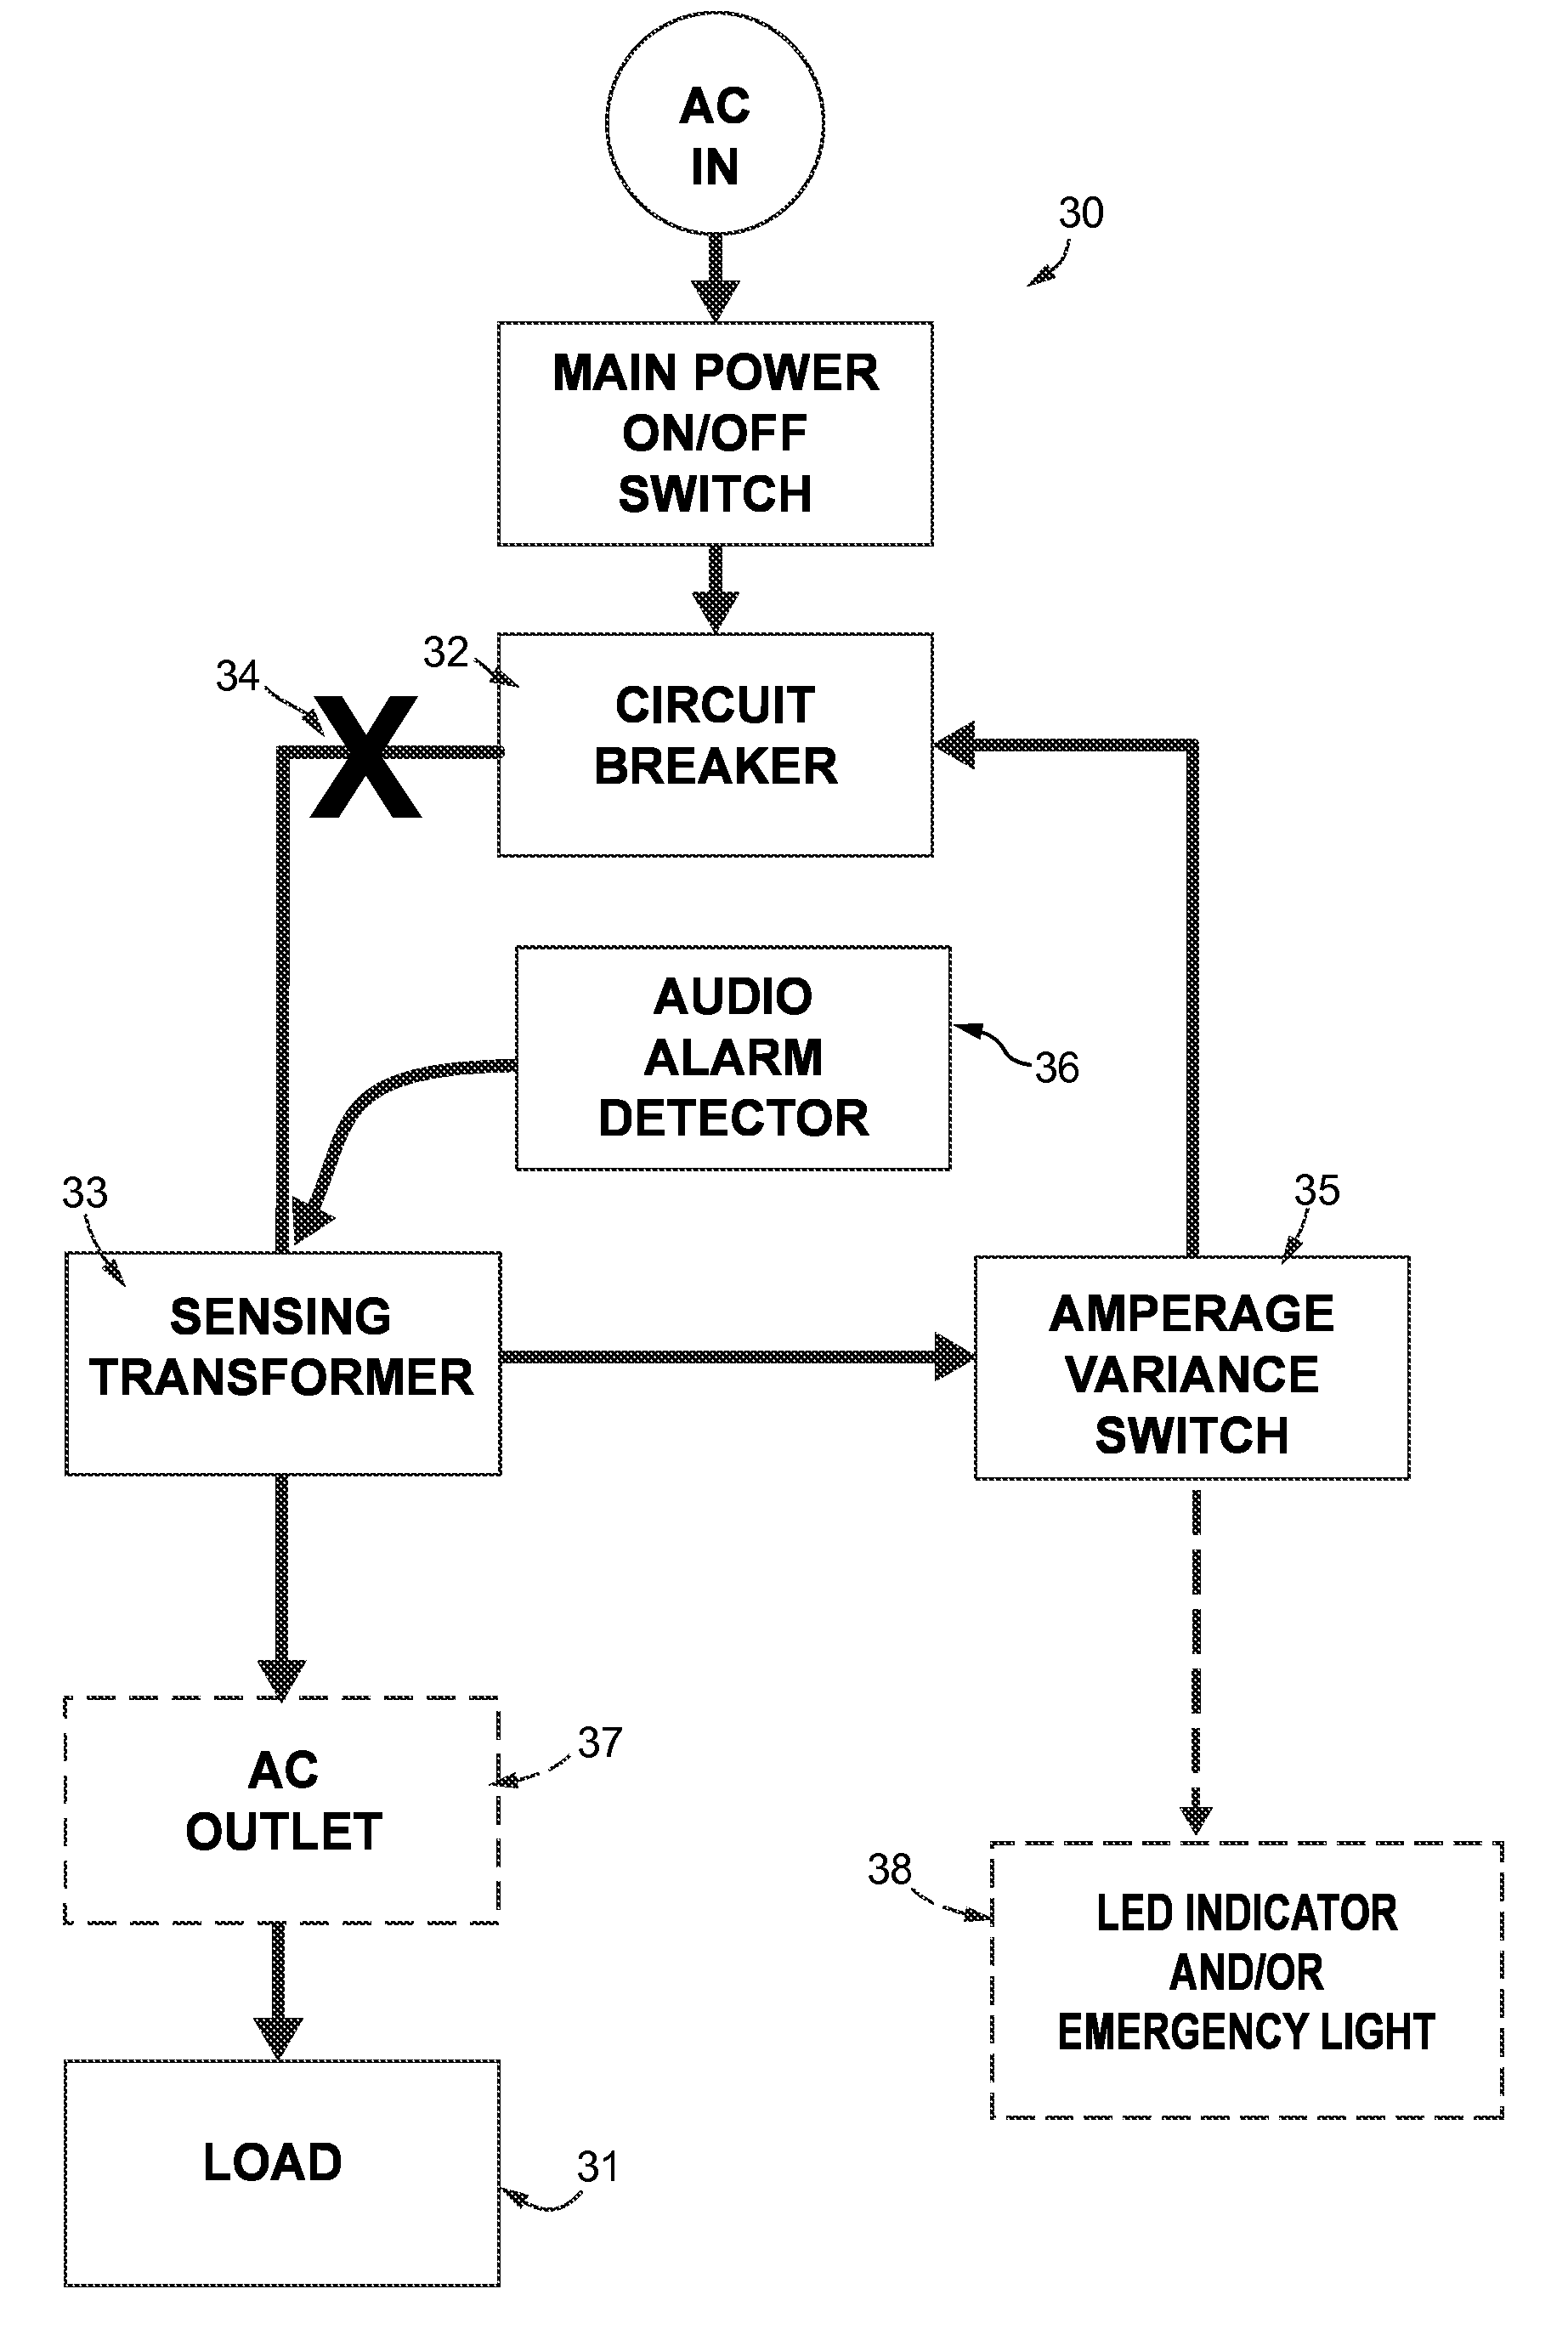 Signal-Activated Circuit Interrupter